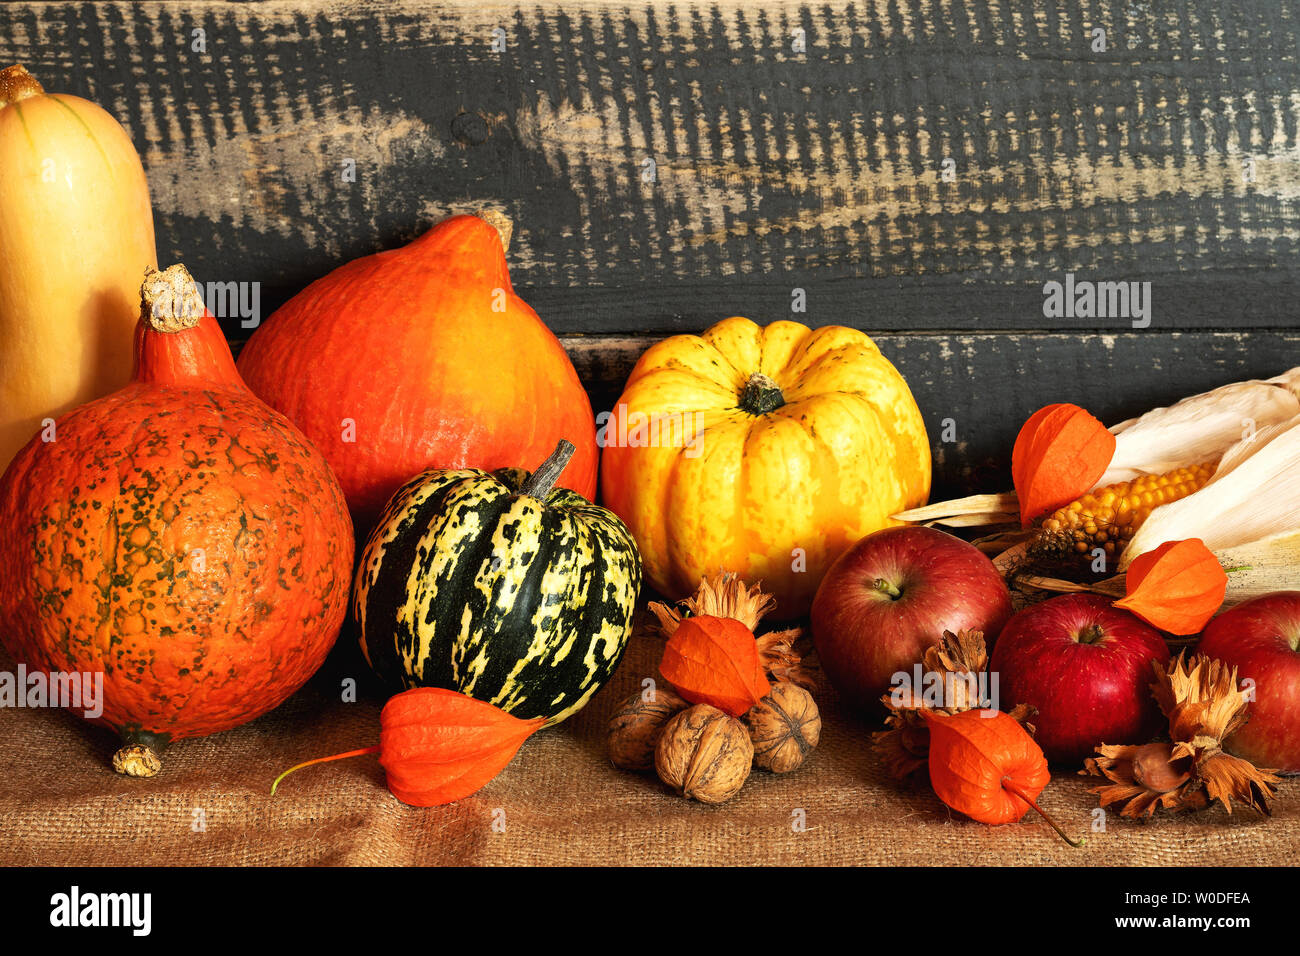 Autumn harvest. Pumpkins, corn, apples, nuts and orange flowers on a jute bag with a background of old planks. Stock Photo